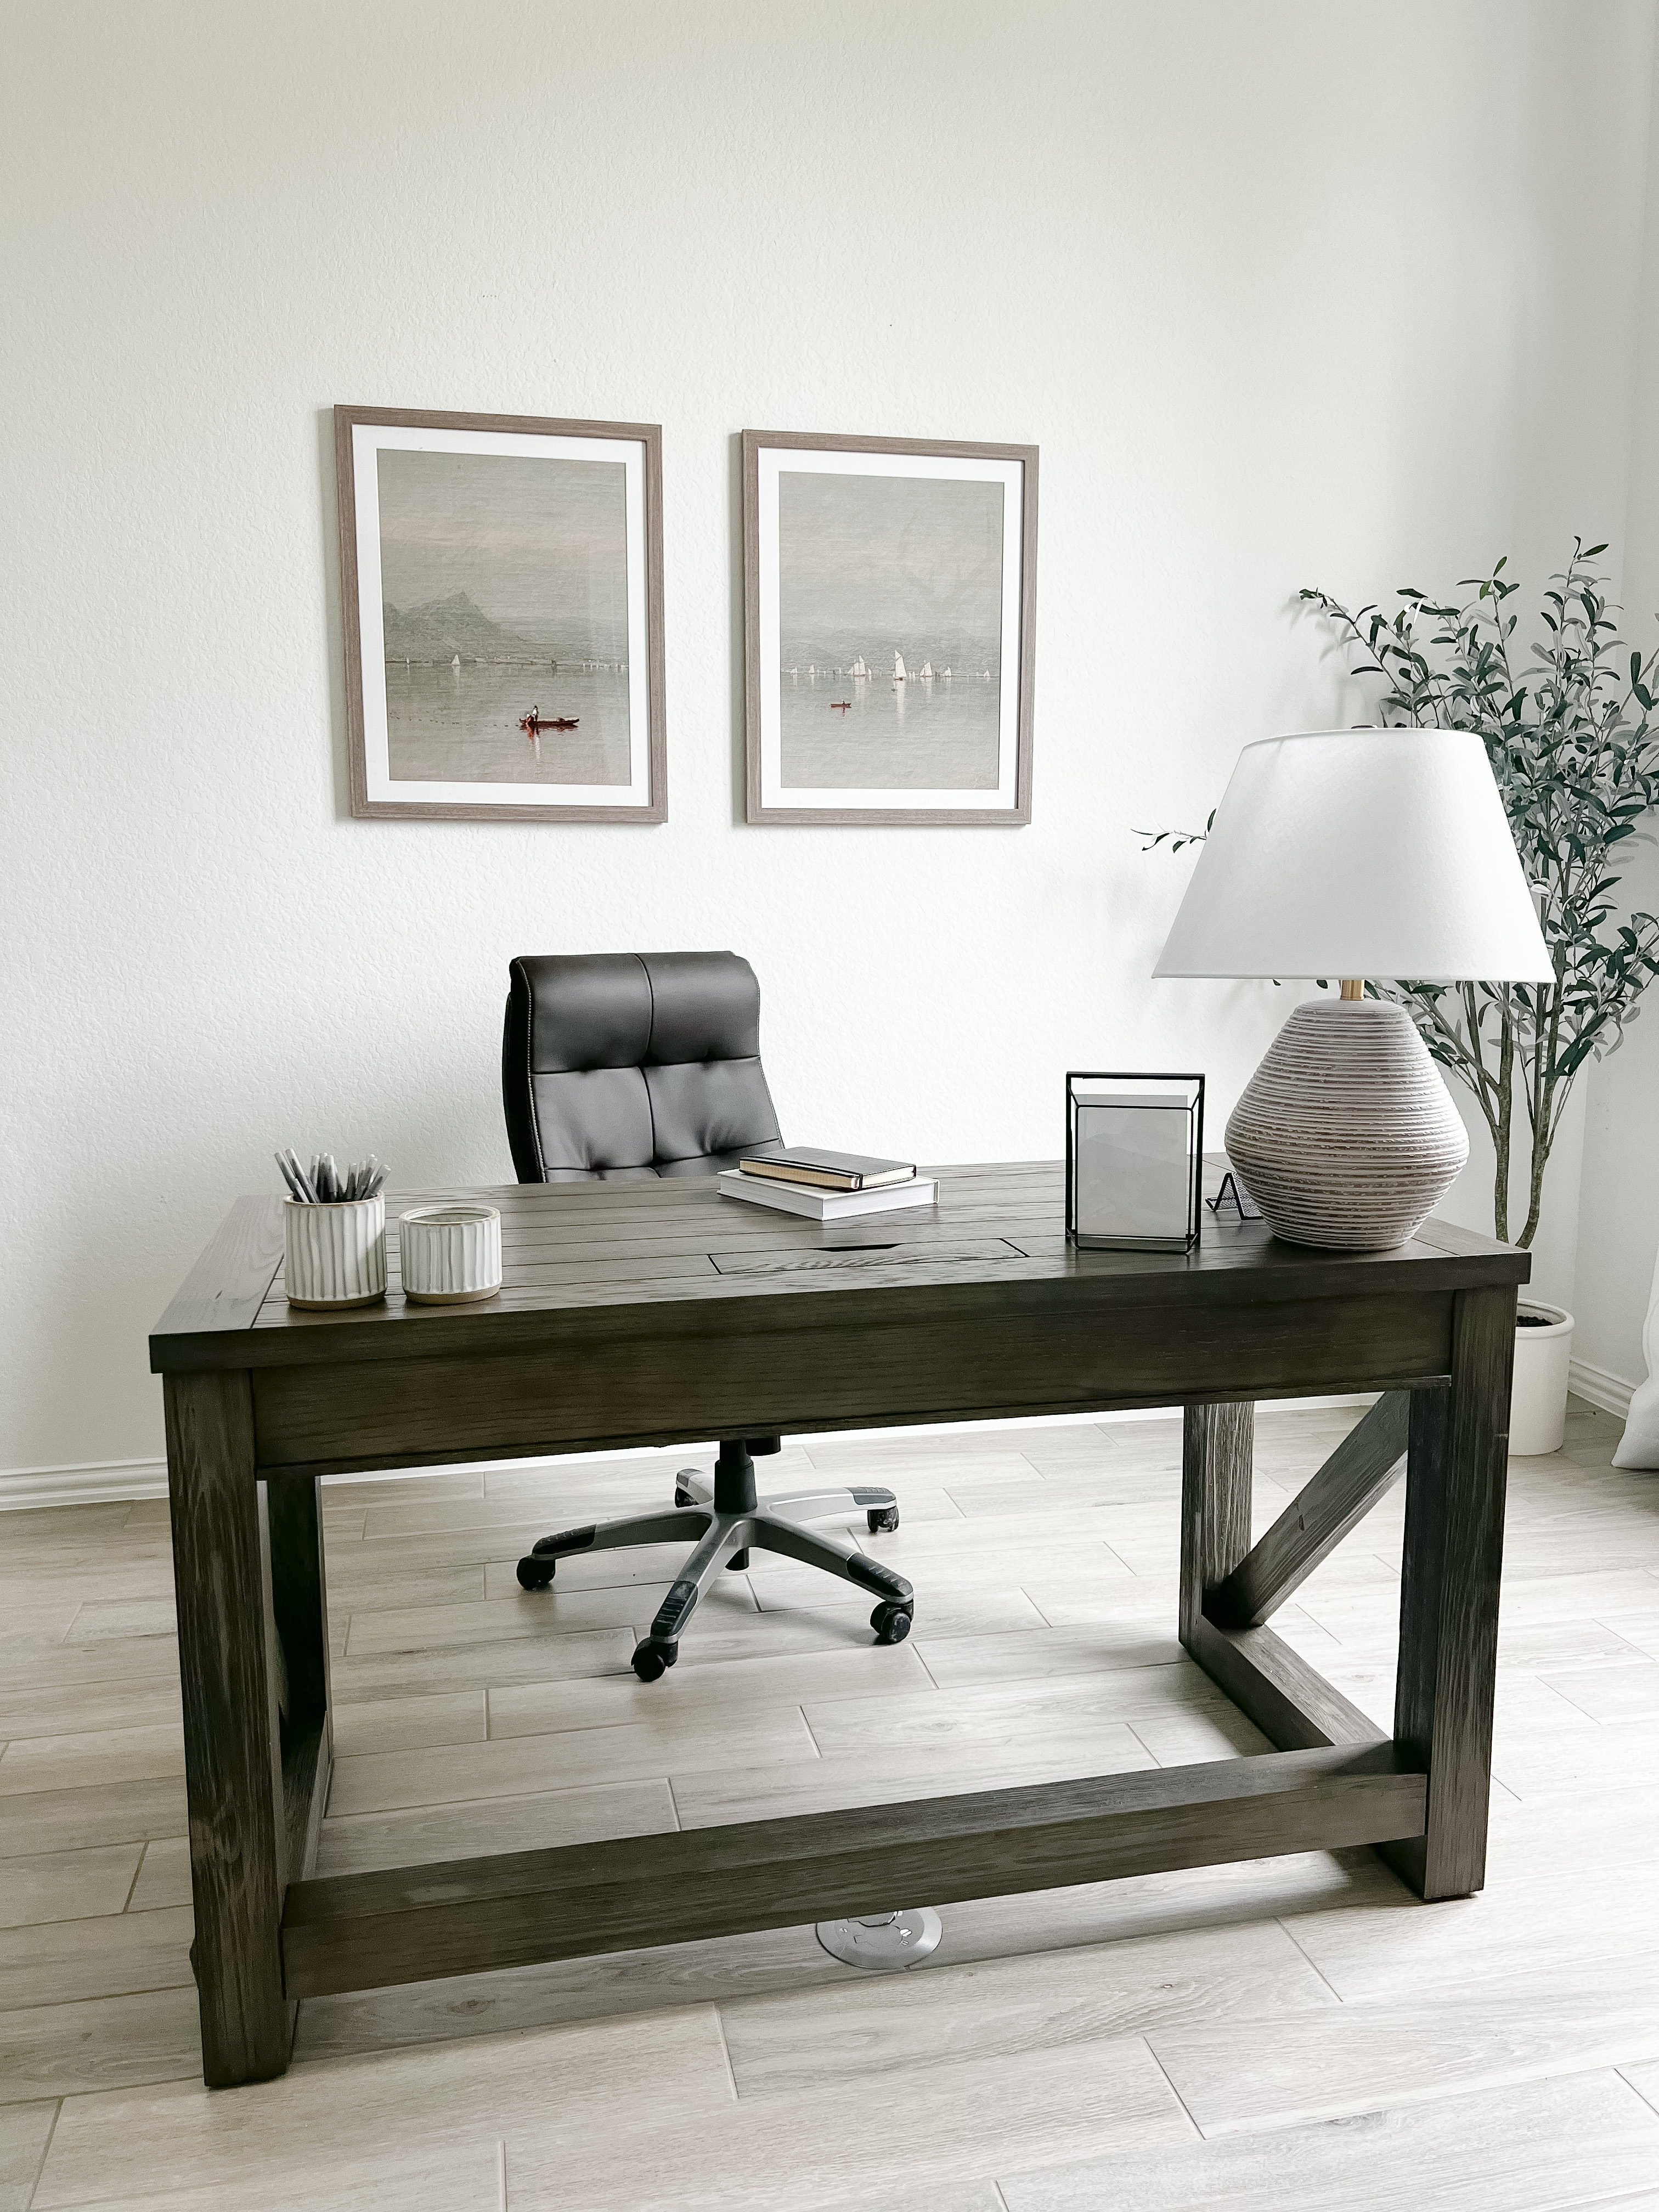 A minimalistic style office with two frames.